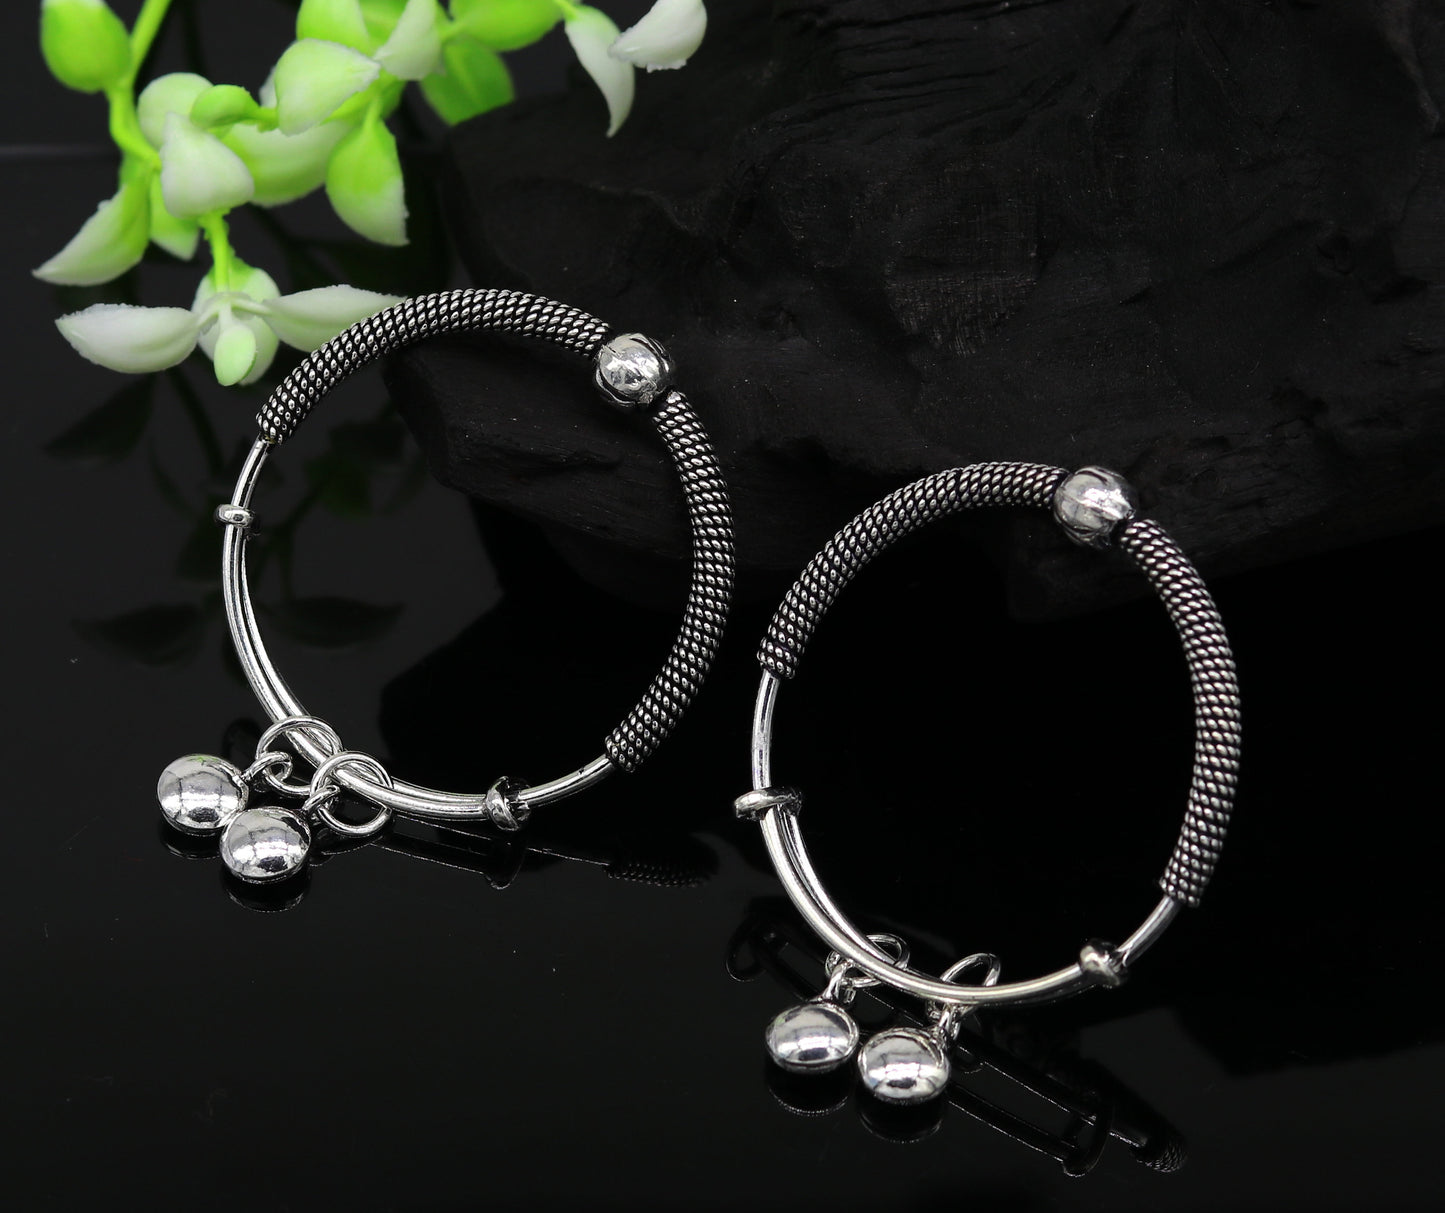 925 sterling silver handmade exclusive vintage design adjustable charm baby bangles kada, silver new born kids jewelry, pretty gifts bbk63 - TRIBAL ORNAMENTS